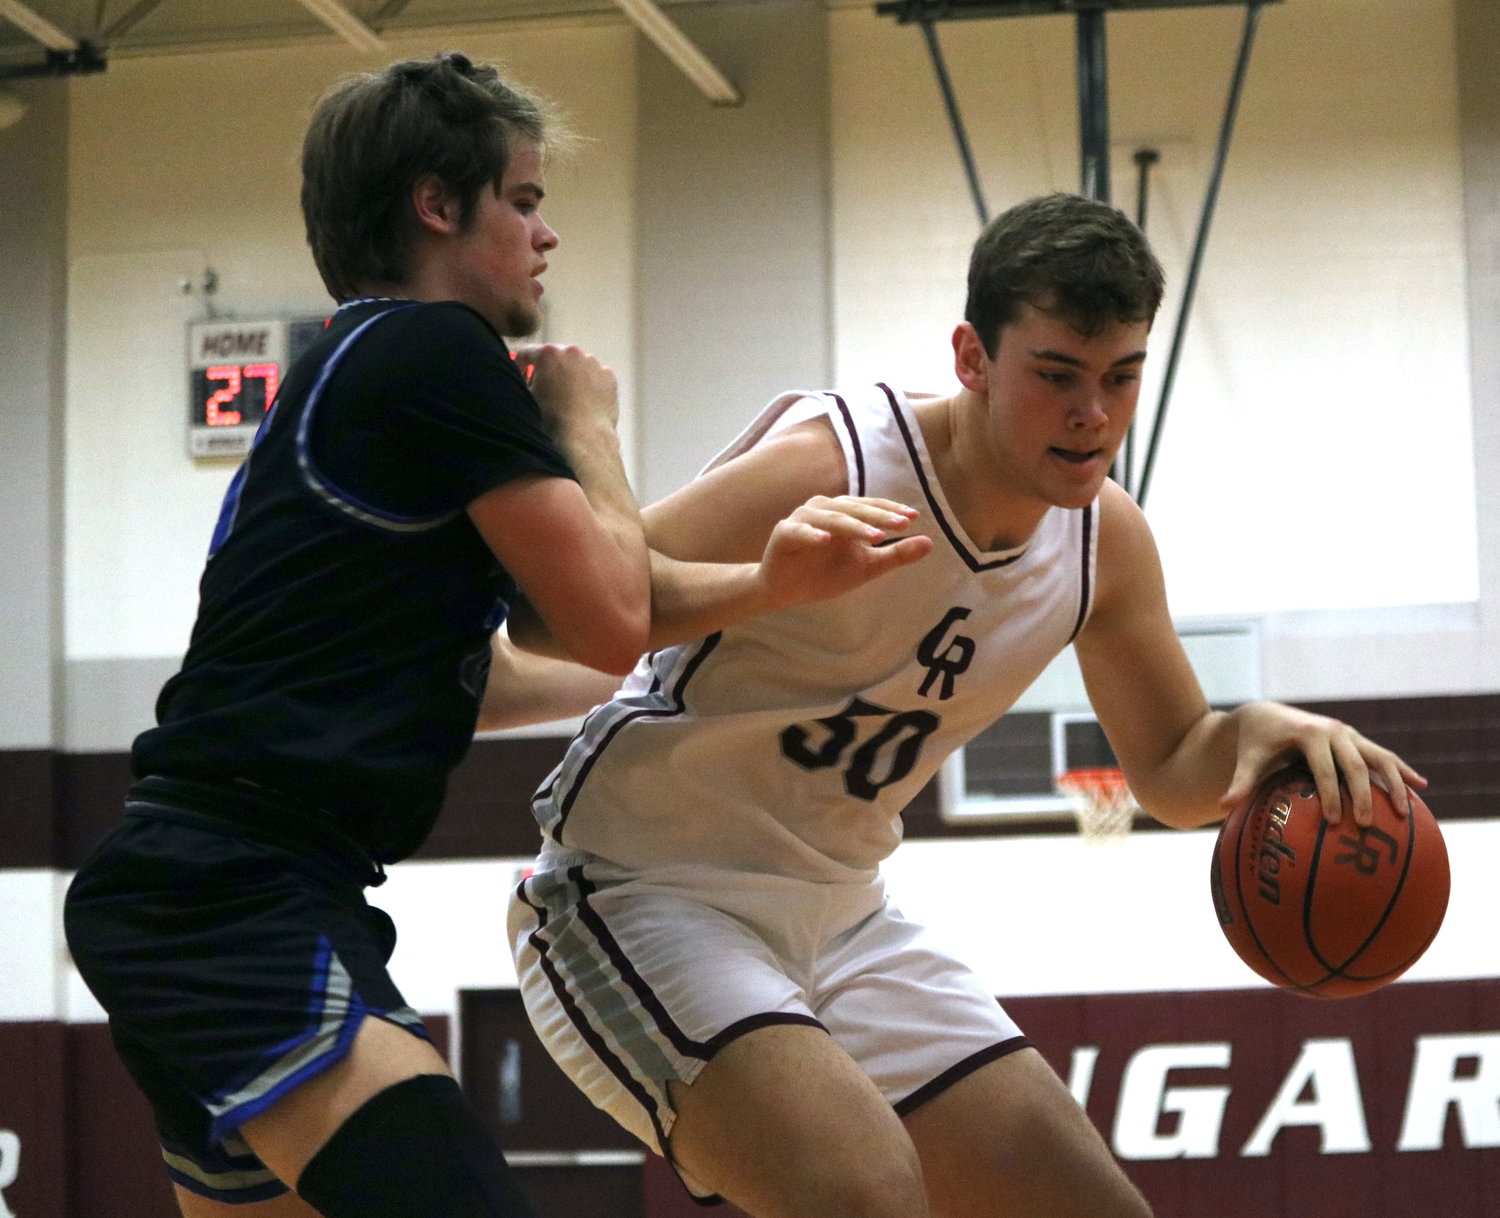 Harrison Moore backs down a defender during Wednesday's game between Cinco Ranch and Taylor at the Cinco Ranch gym.